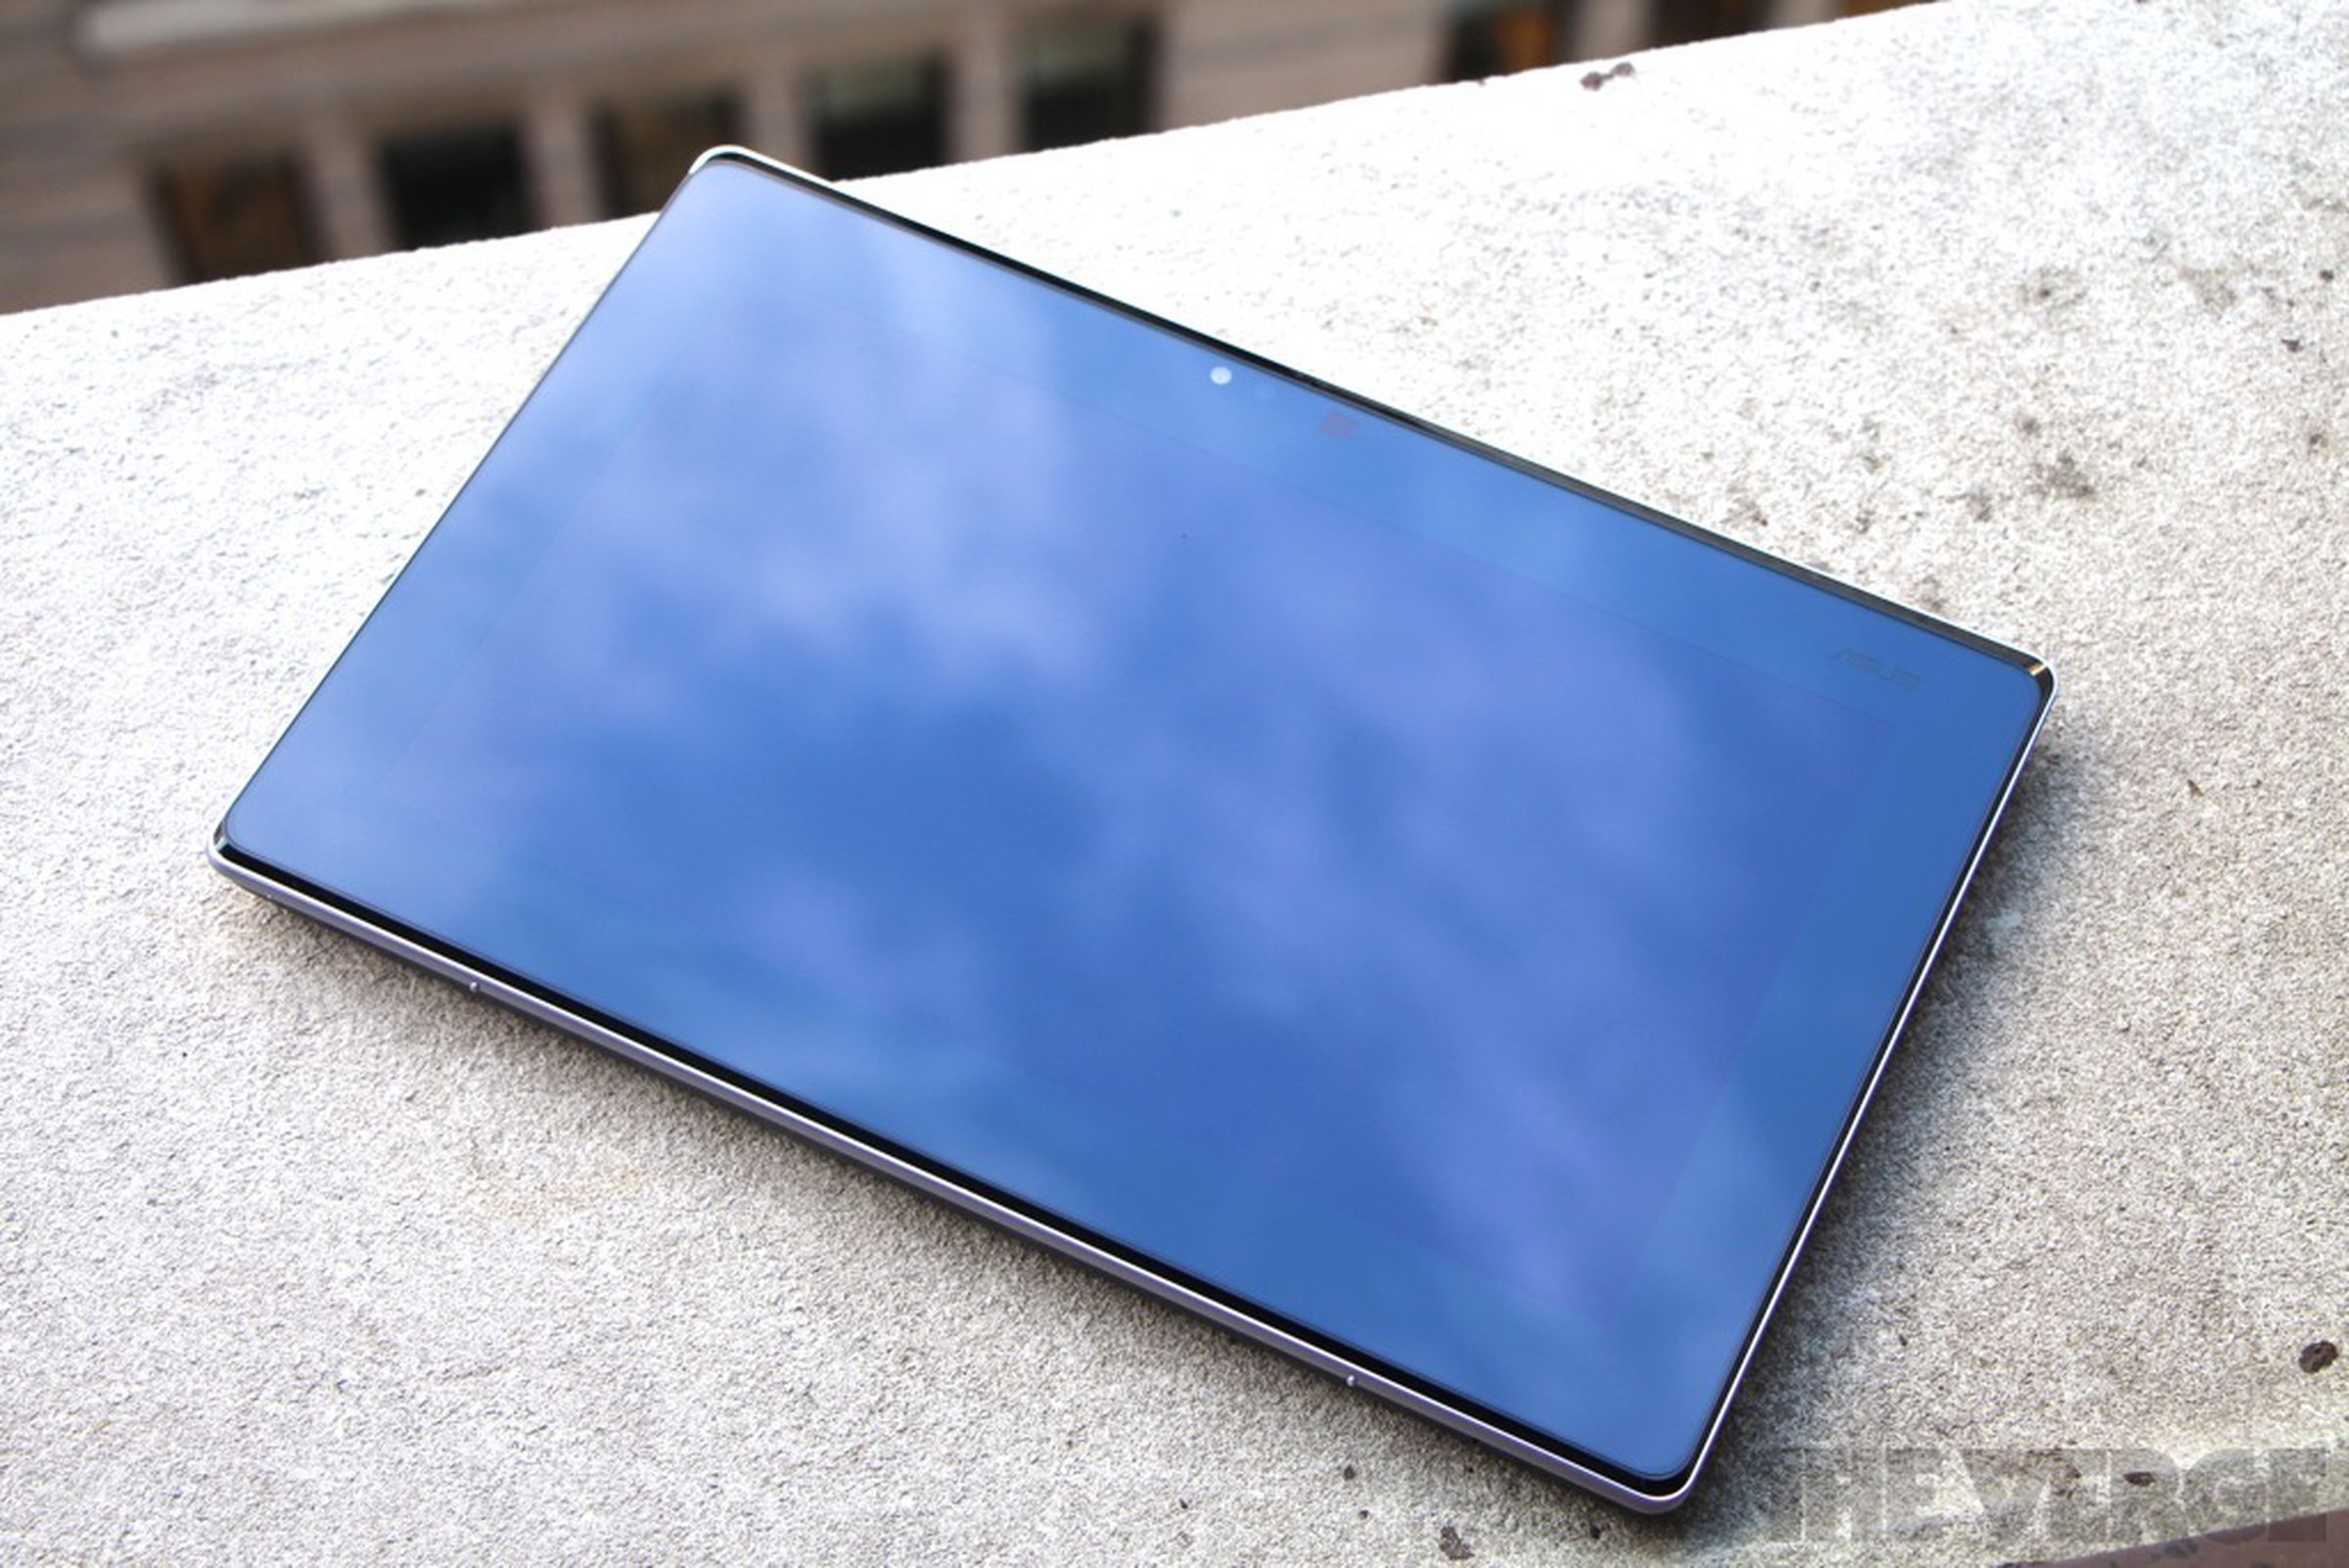 Asus Taichi 21 hands-on pictures